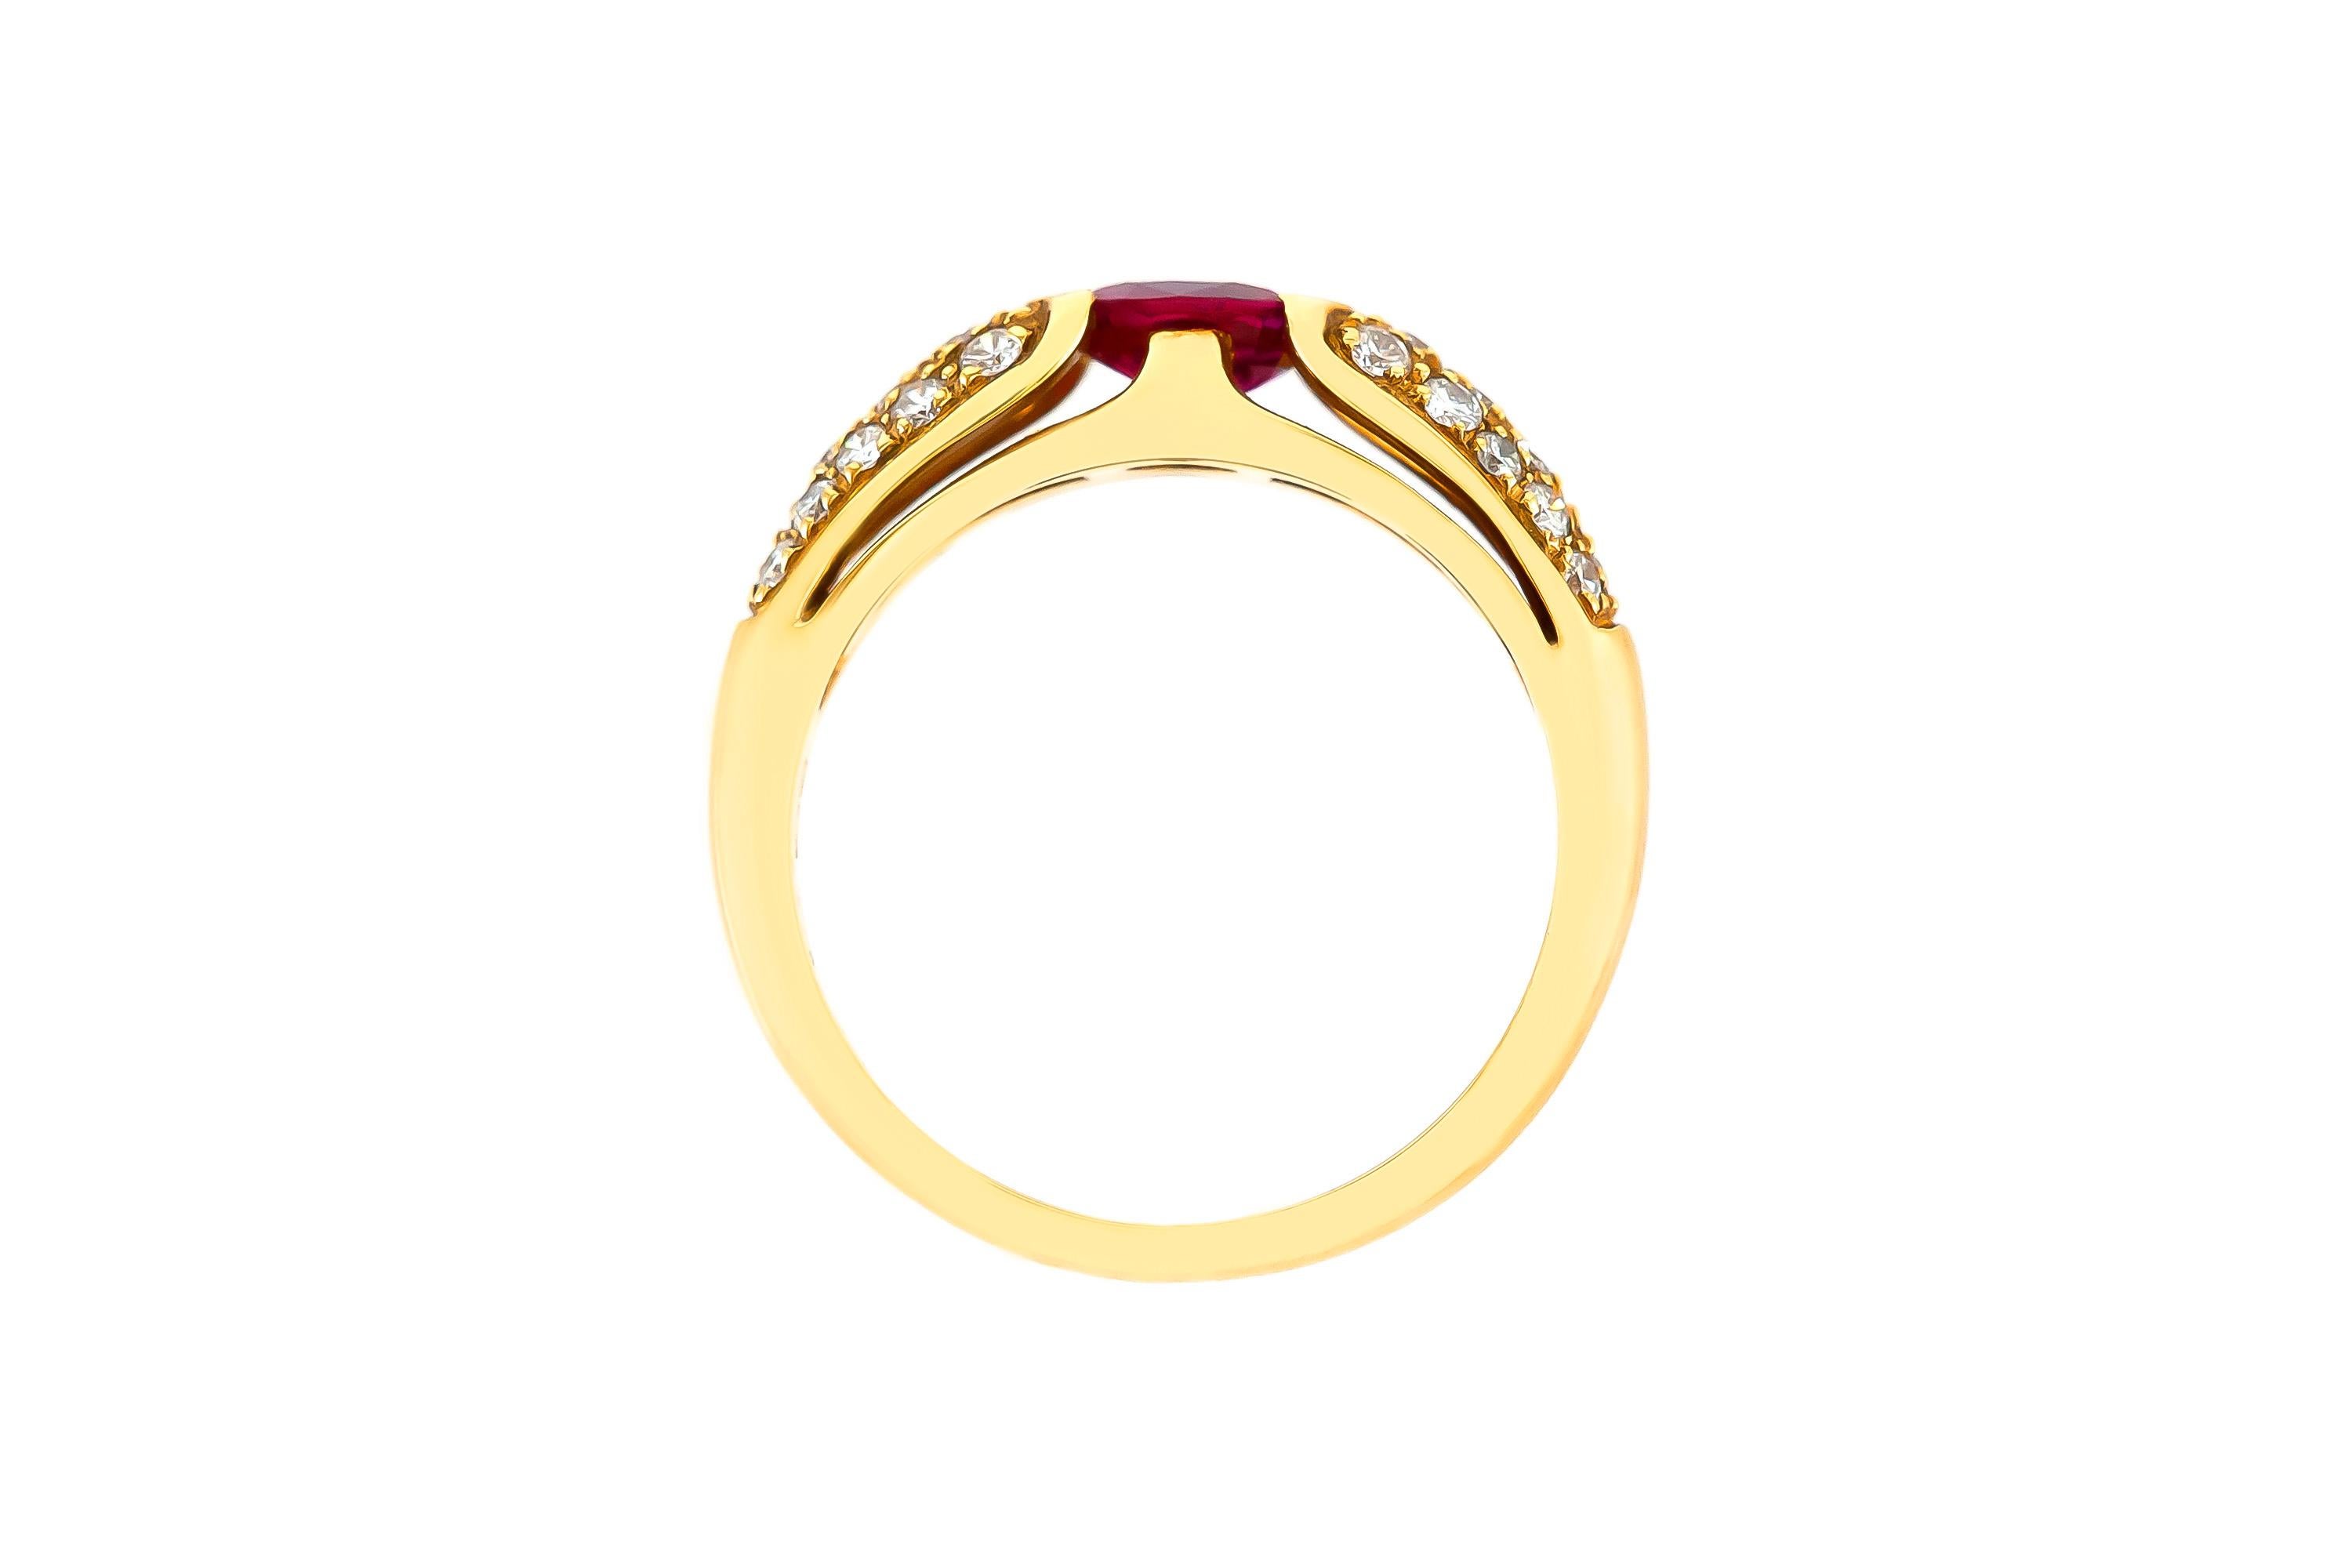 The ring is finely carfted in 18k yellow gold with center ruby weighing approximately total of 0.60 carat and diamonds weighing approximately total of 0.50 carat.
Circa 1970.